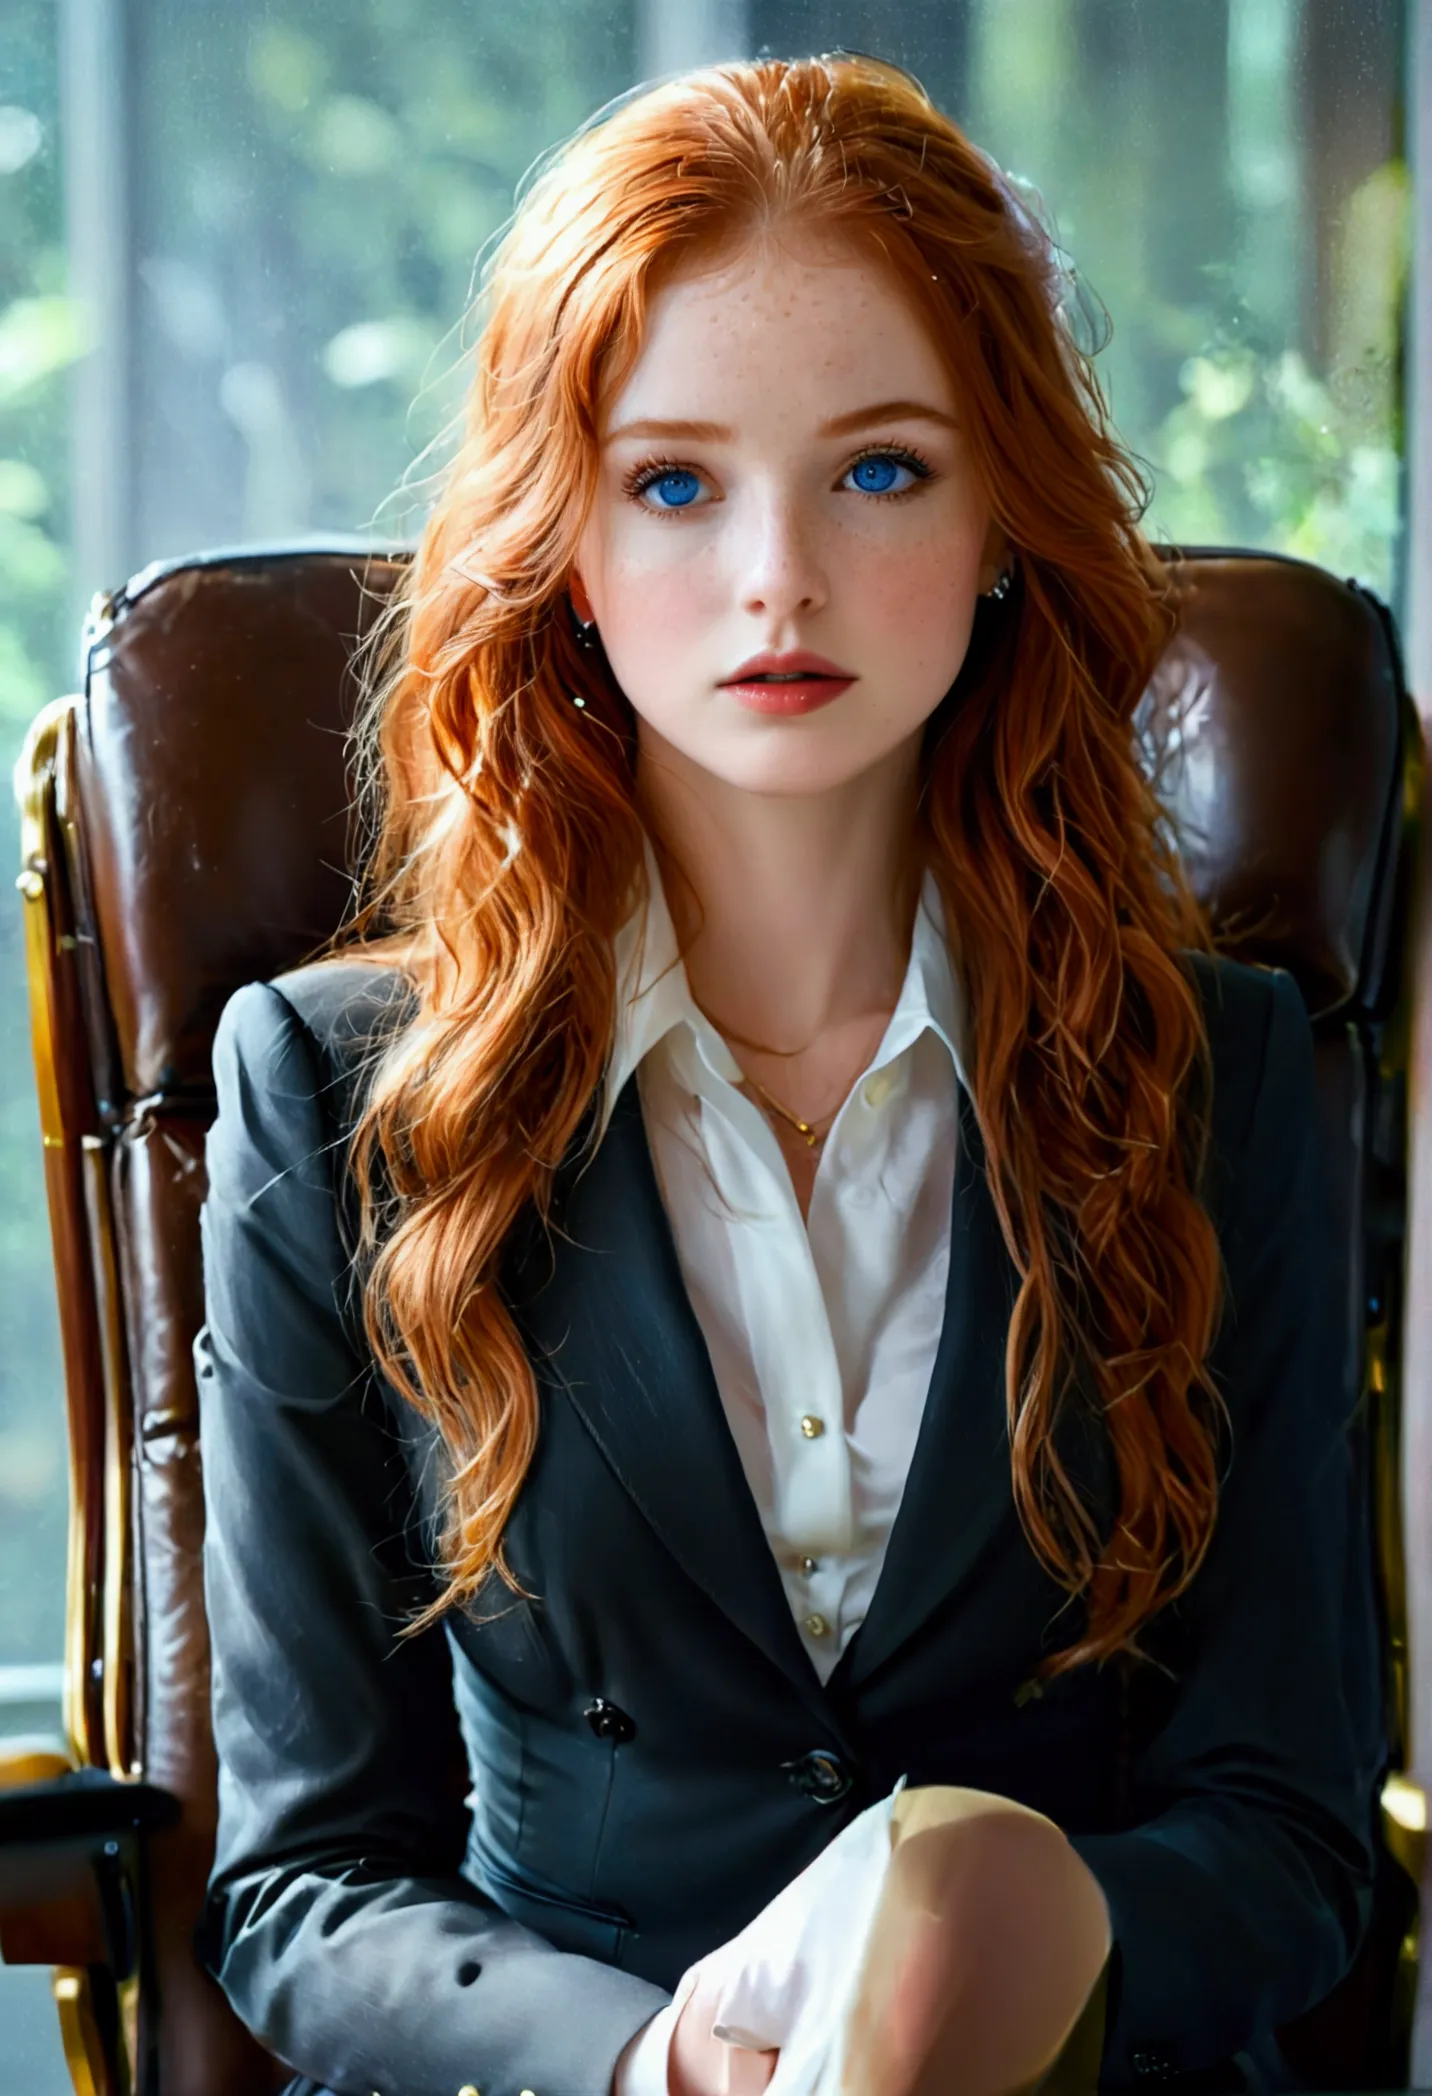 ultra realistic, fot, long redhead hair, beautiful blue eyes like the sky, pale white skin adorned with freckles, 24 year old gi...